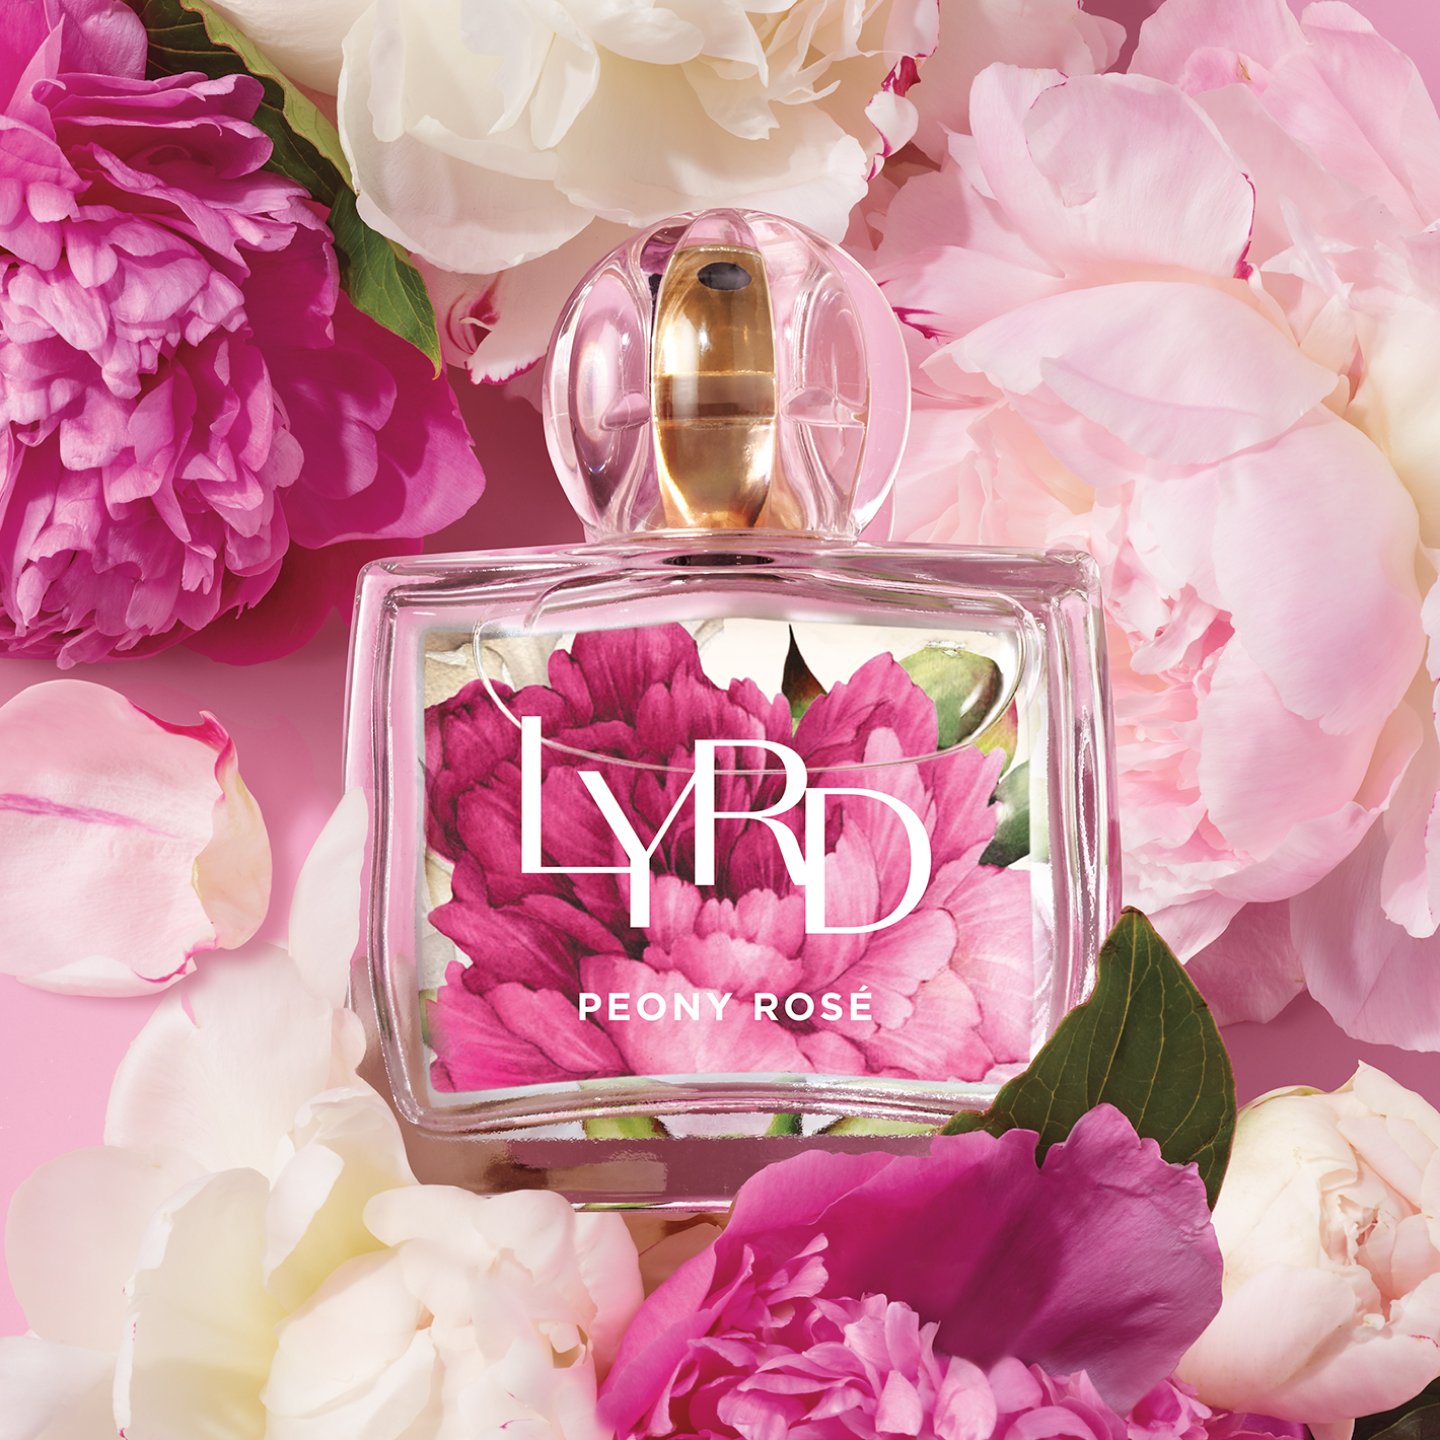 : A bottle of LYRD Peony Rose perfume surrounded by pink & white peony petals on a bright backdrop.